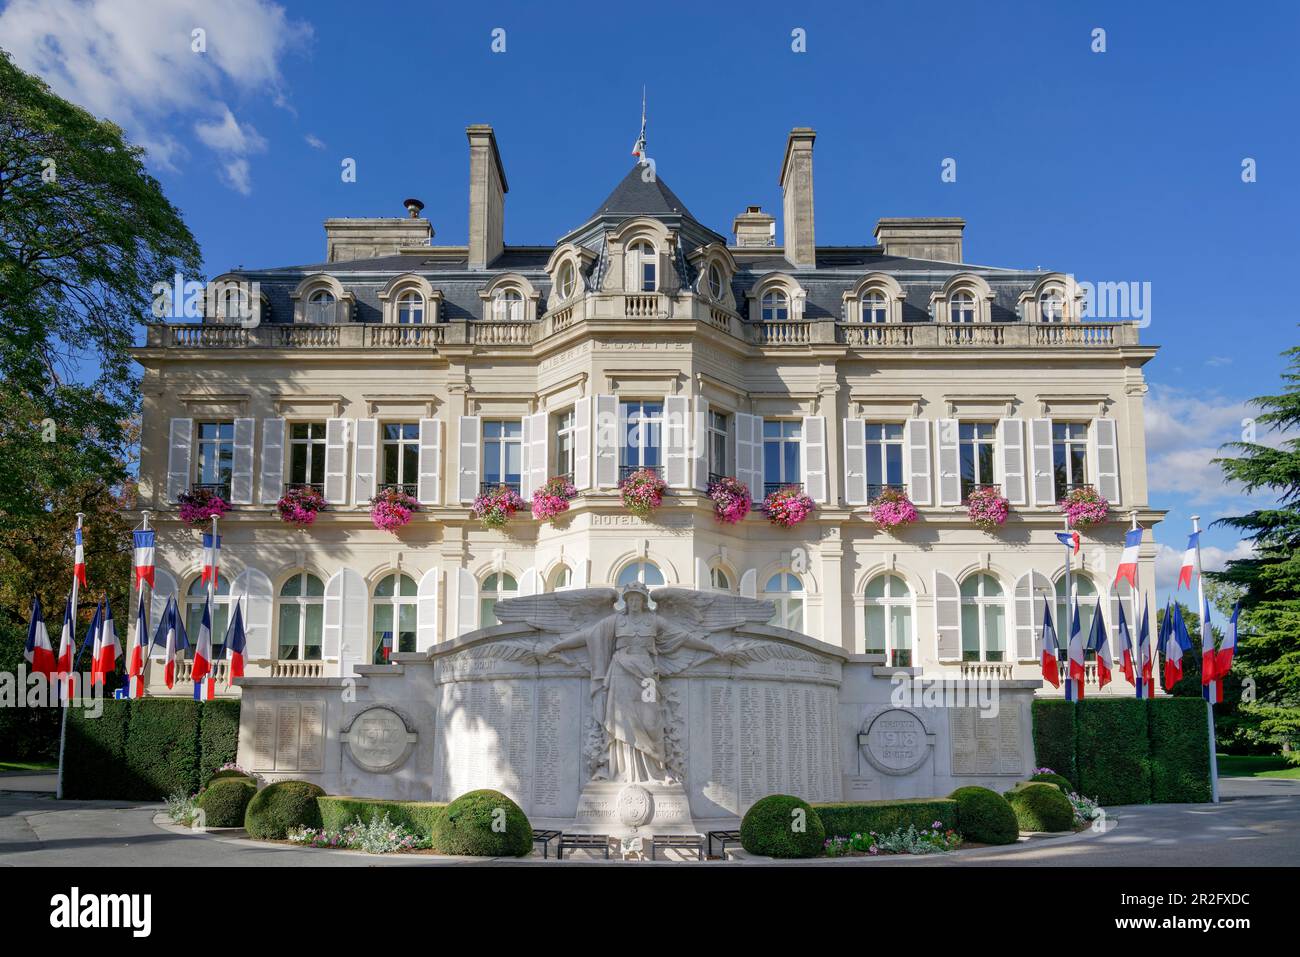 Hotel de Ville, Town Hall, Epernay, Champagne, Marne, France Stock Photo